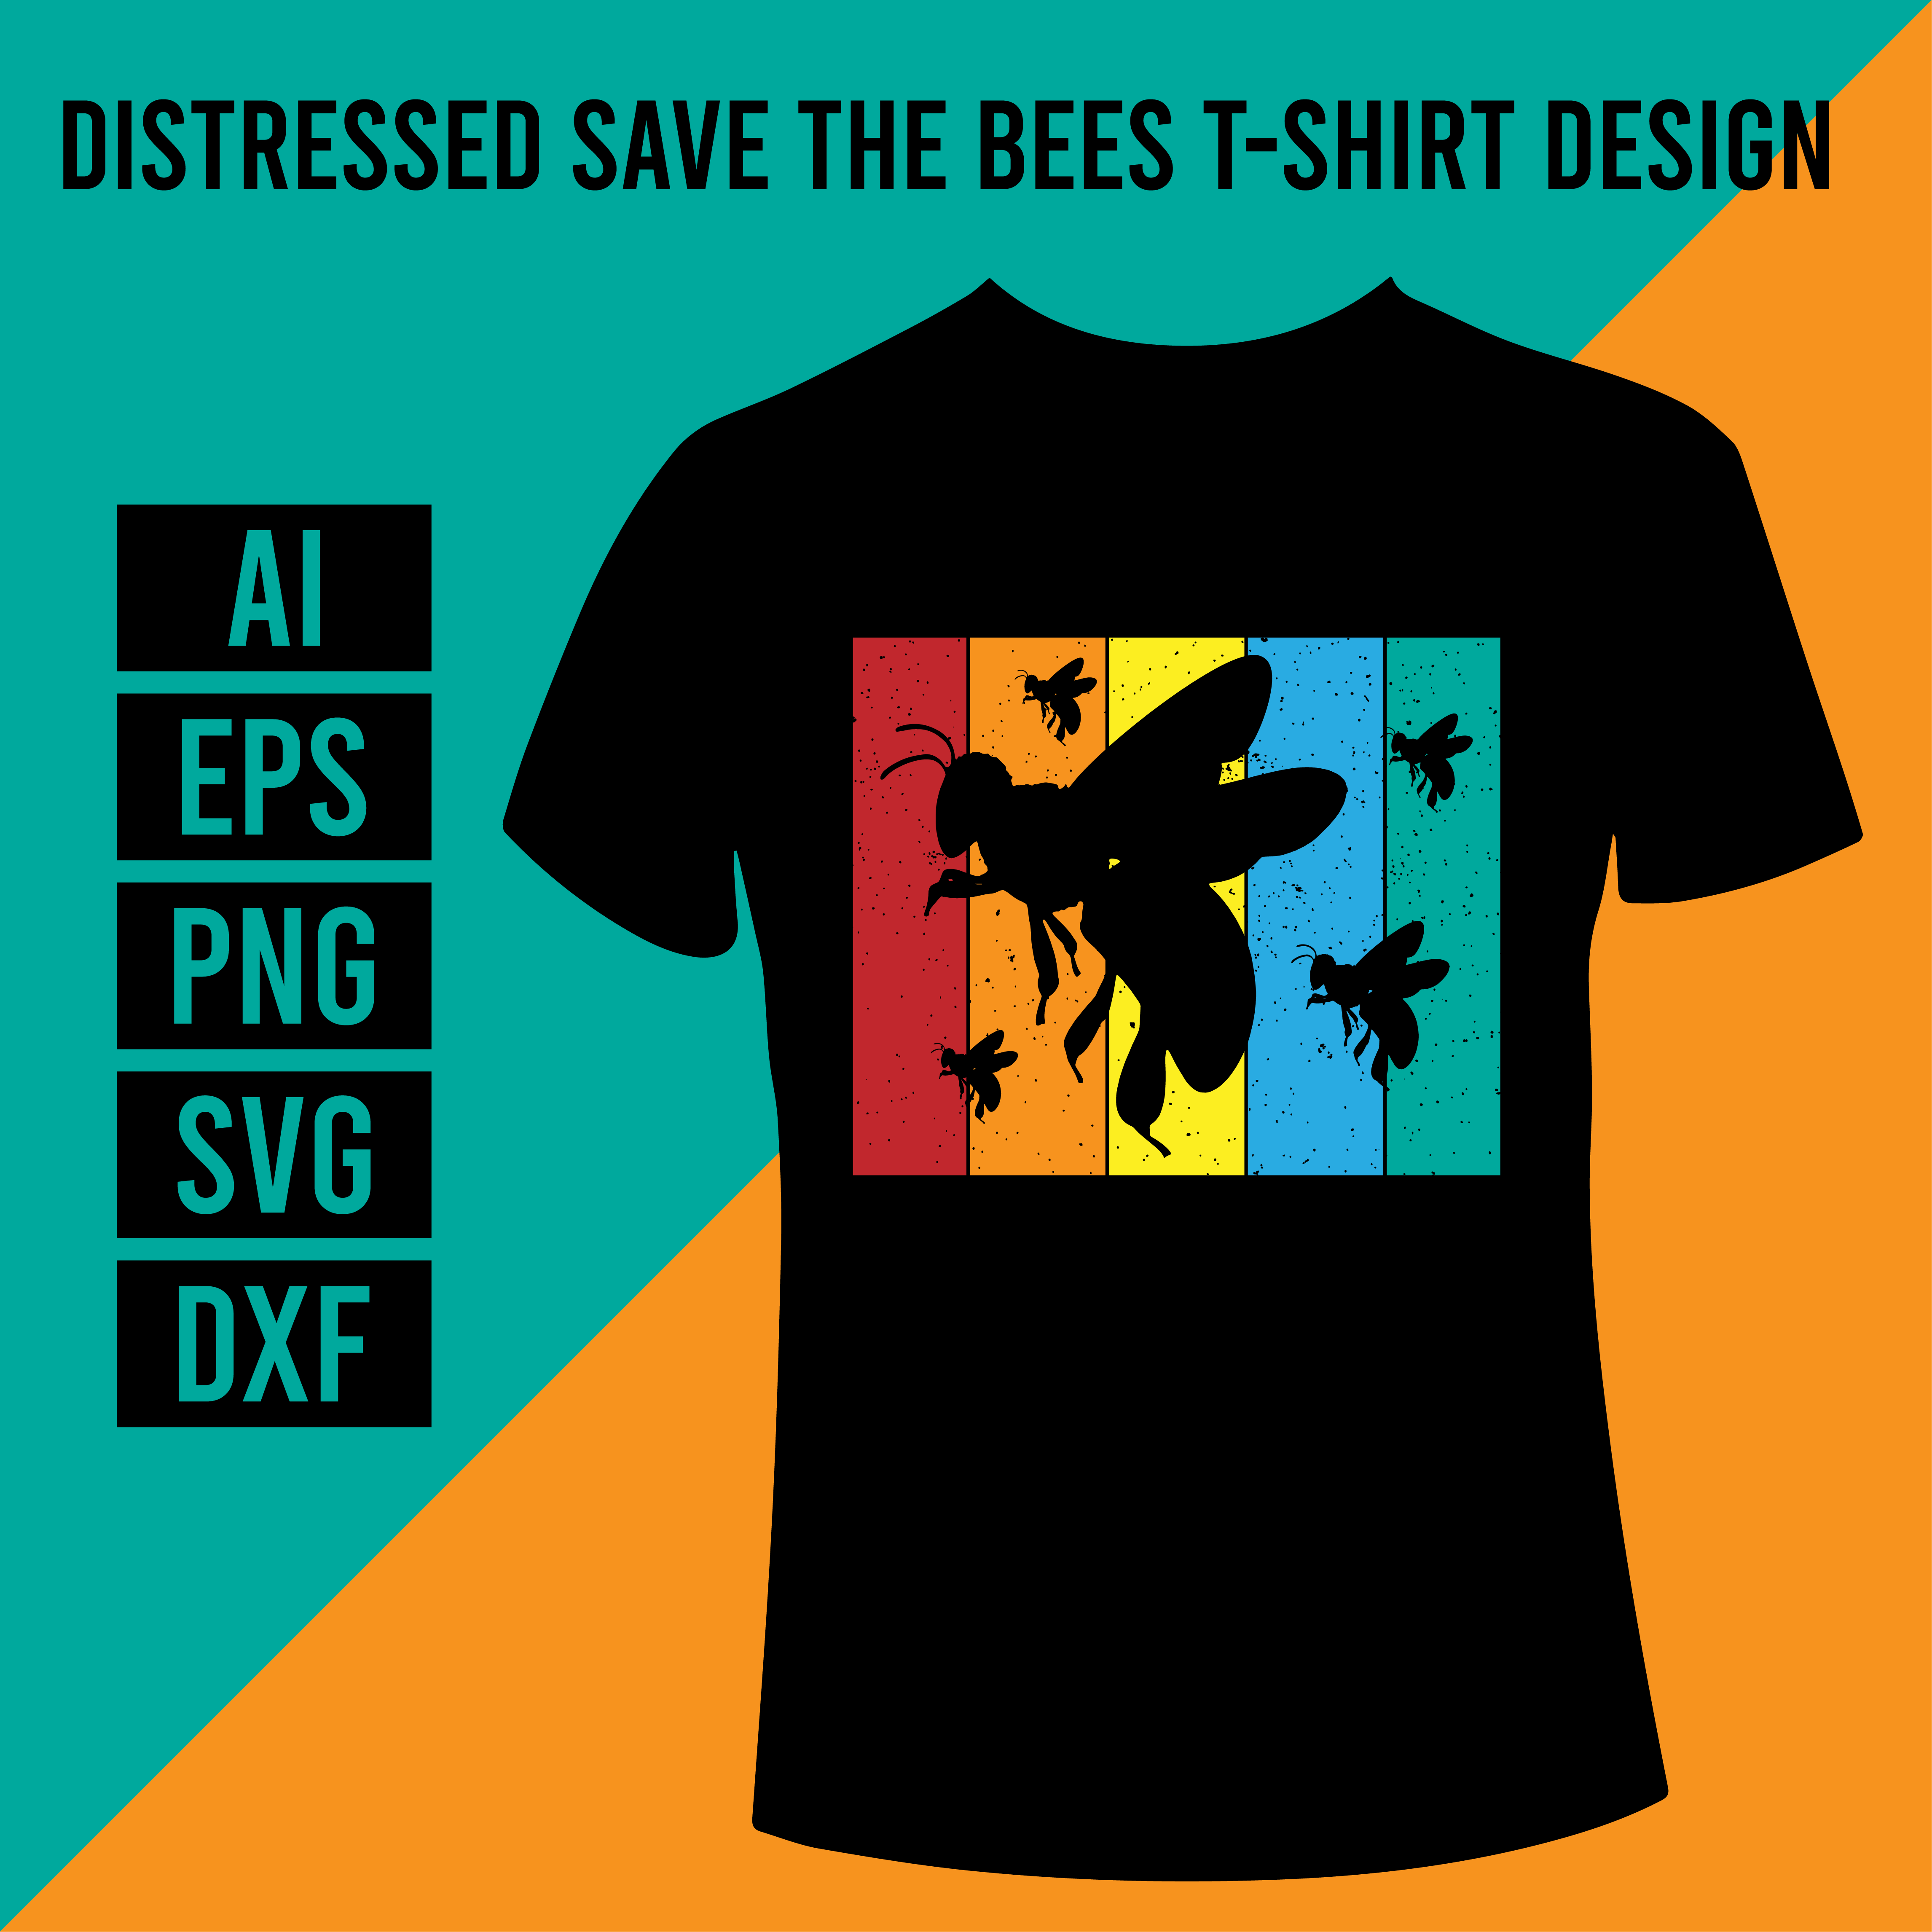 Distressed Save the Bees T- Shirt Design main cover.